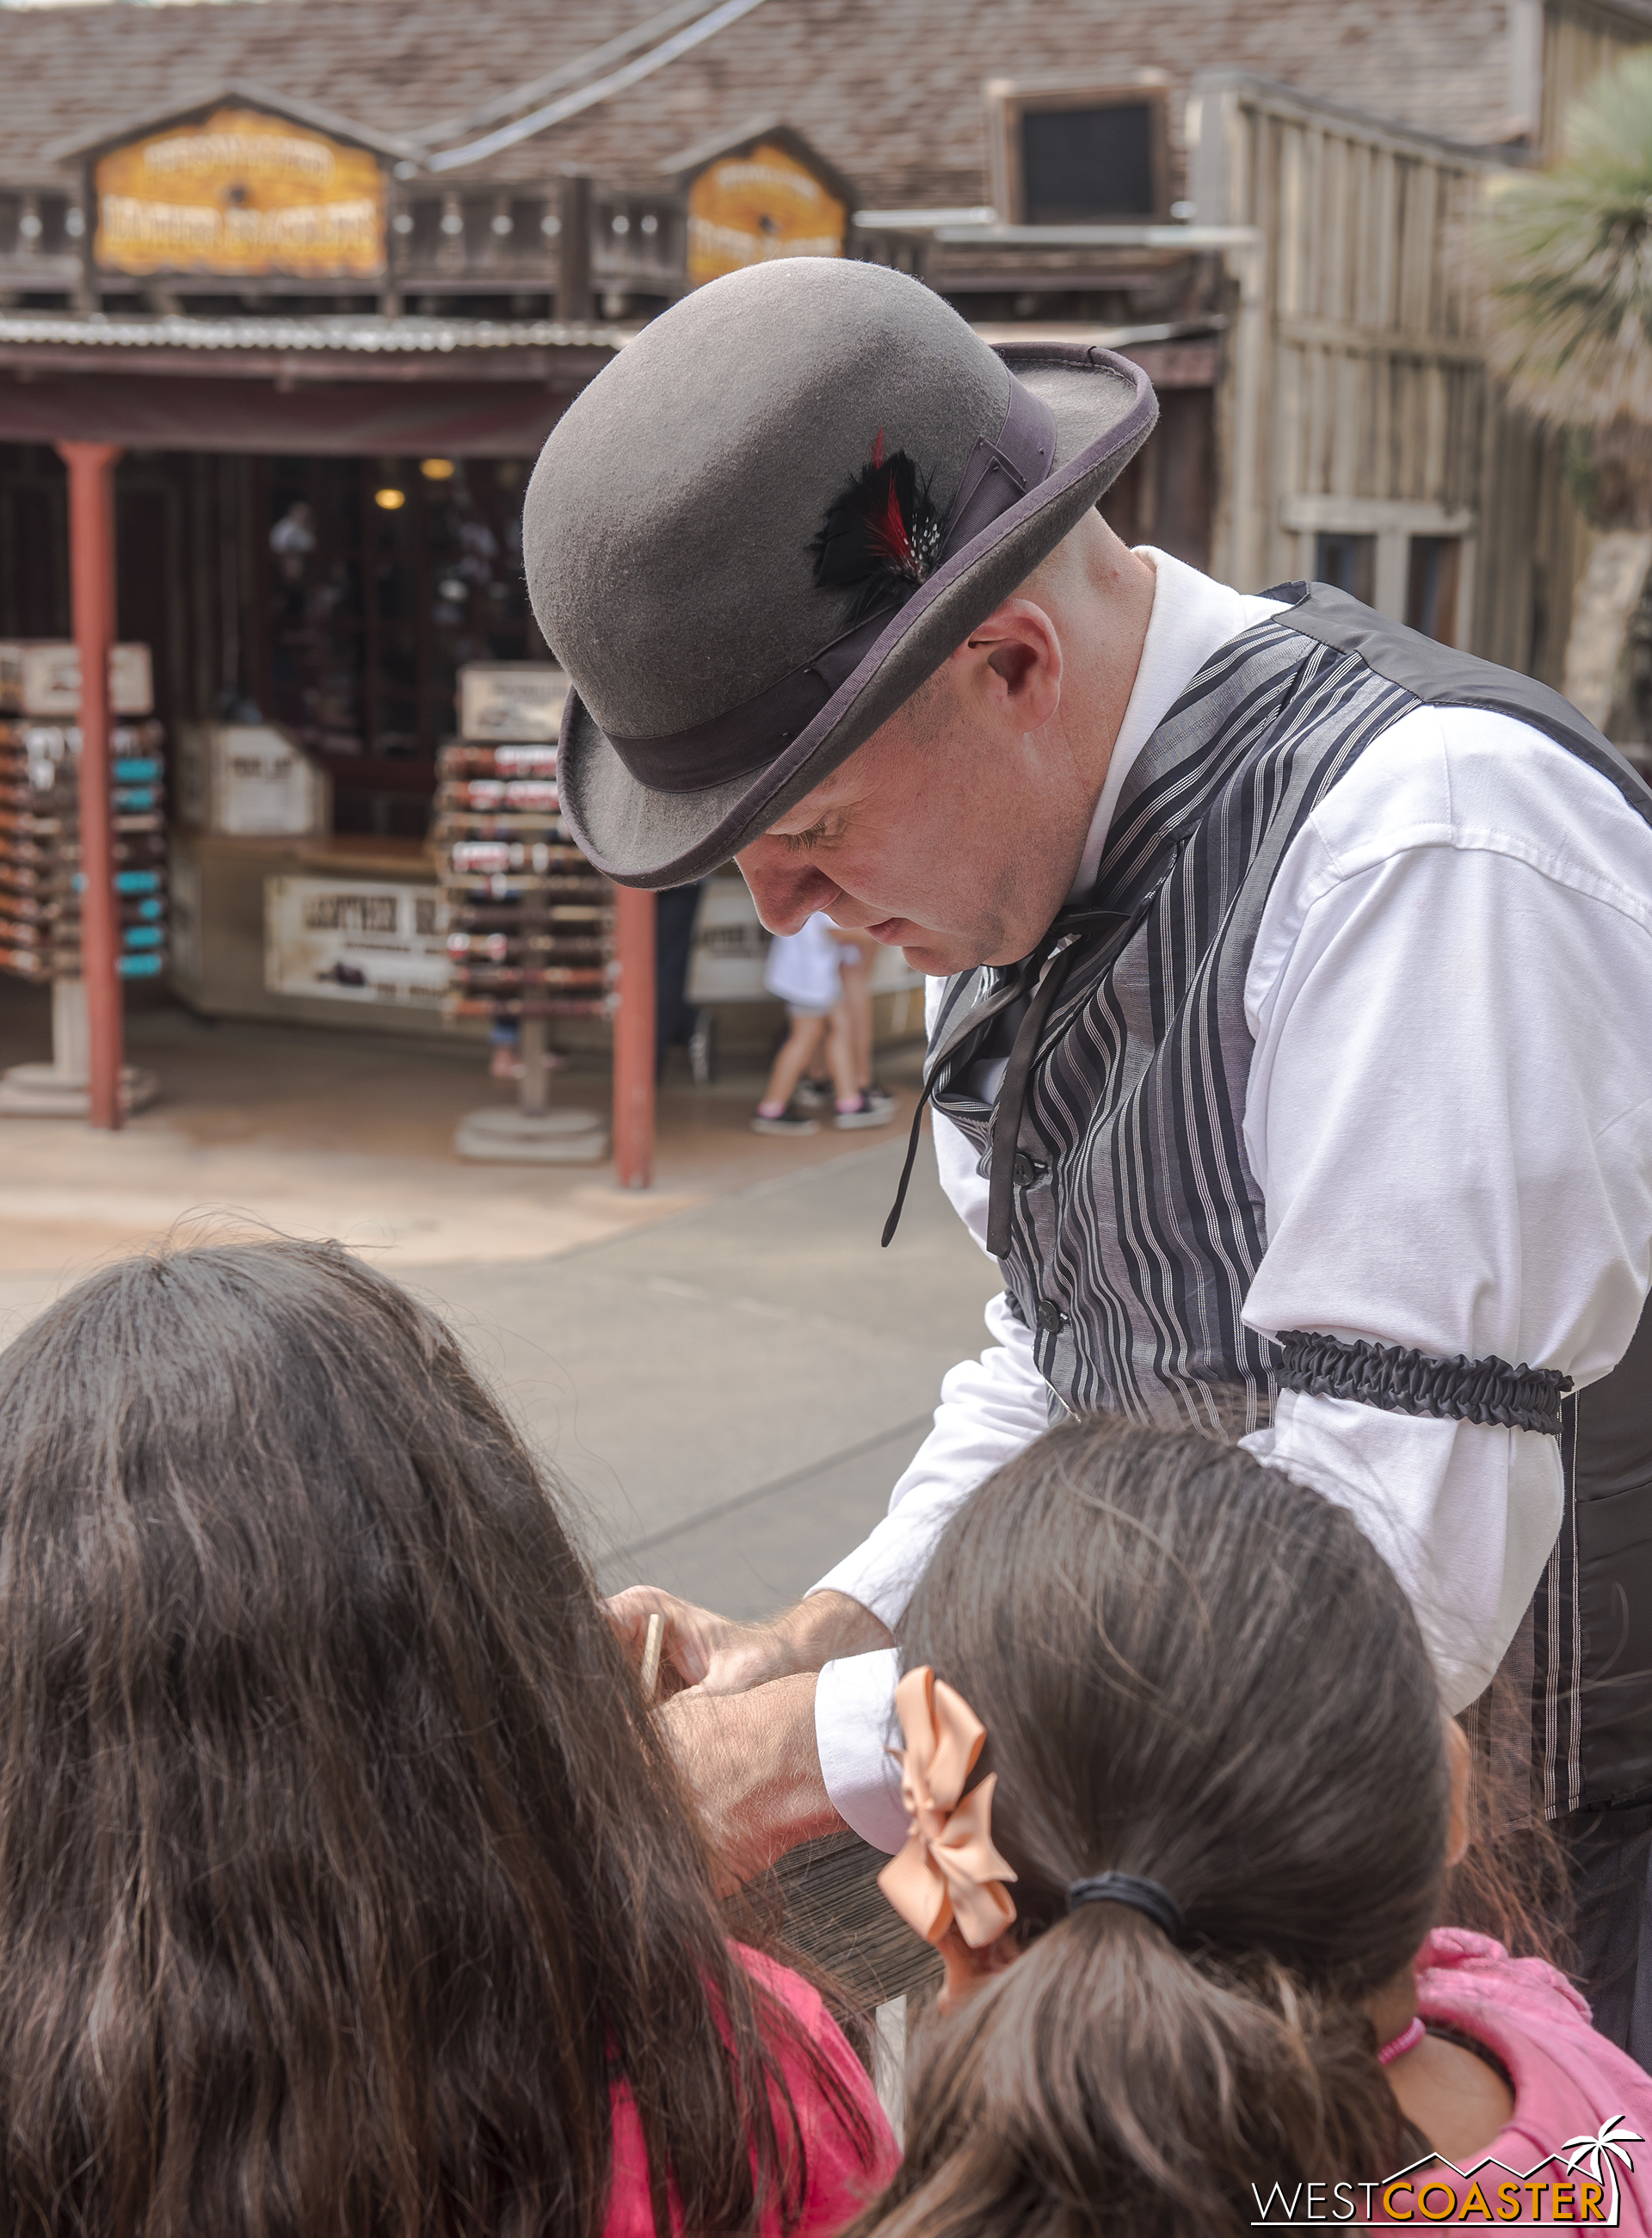  Colonel Potter engages with two young guests, asking them to help with a task. 